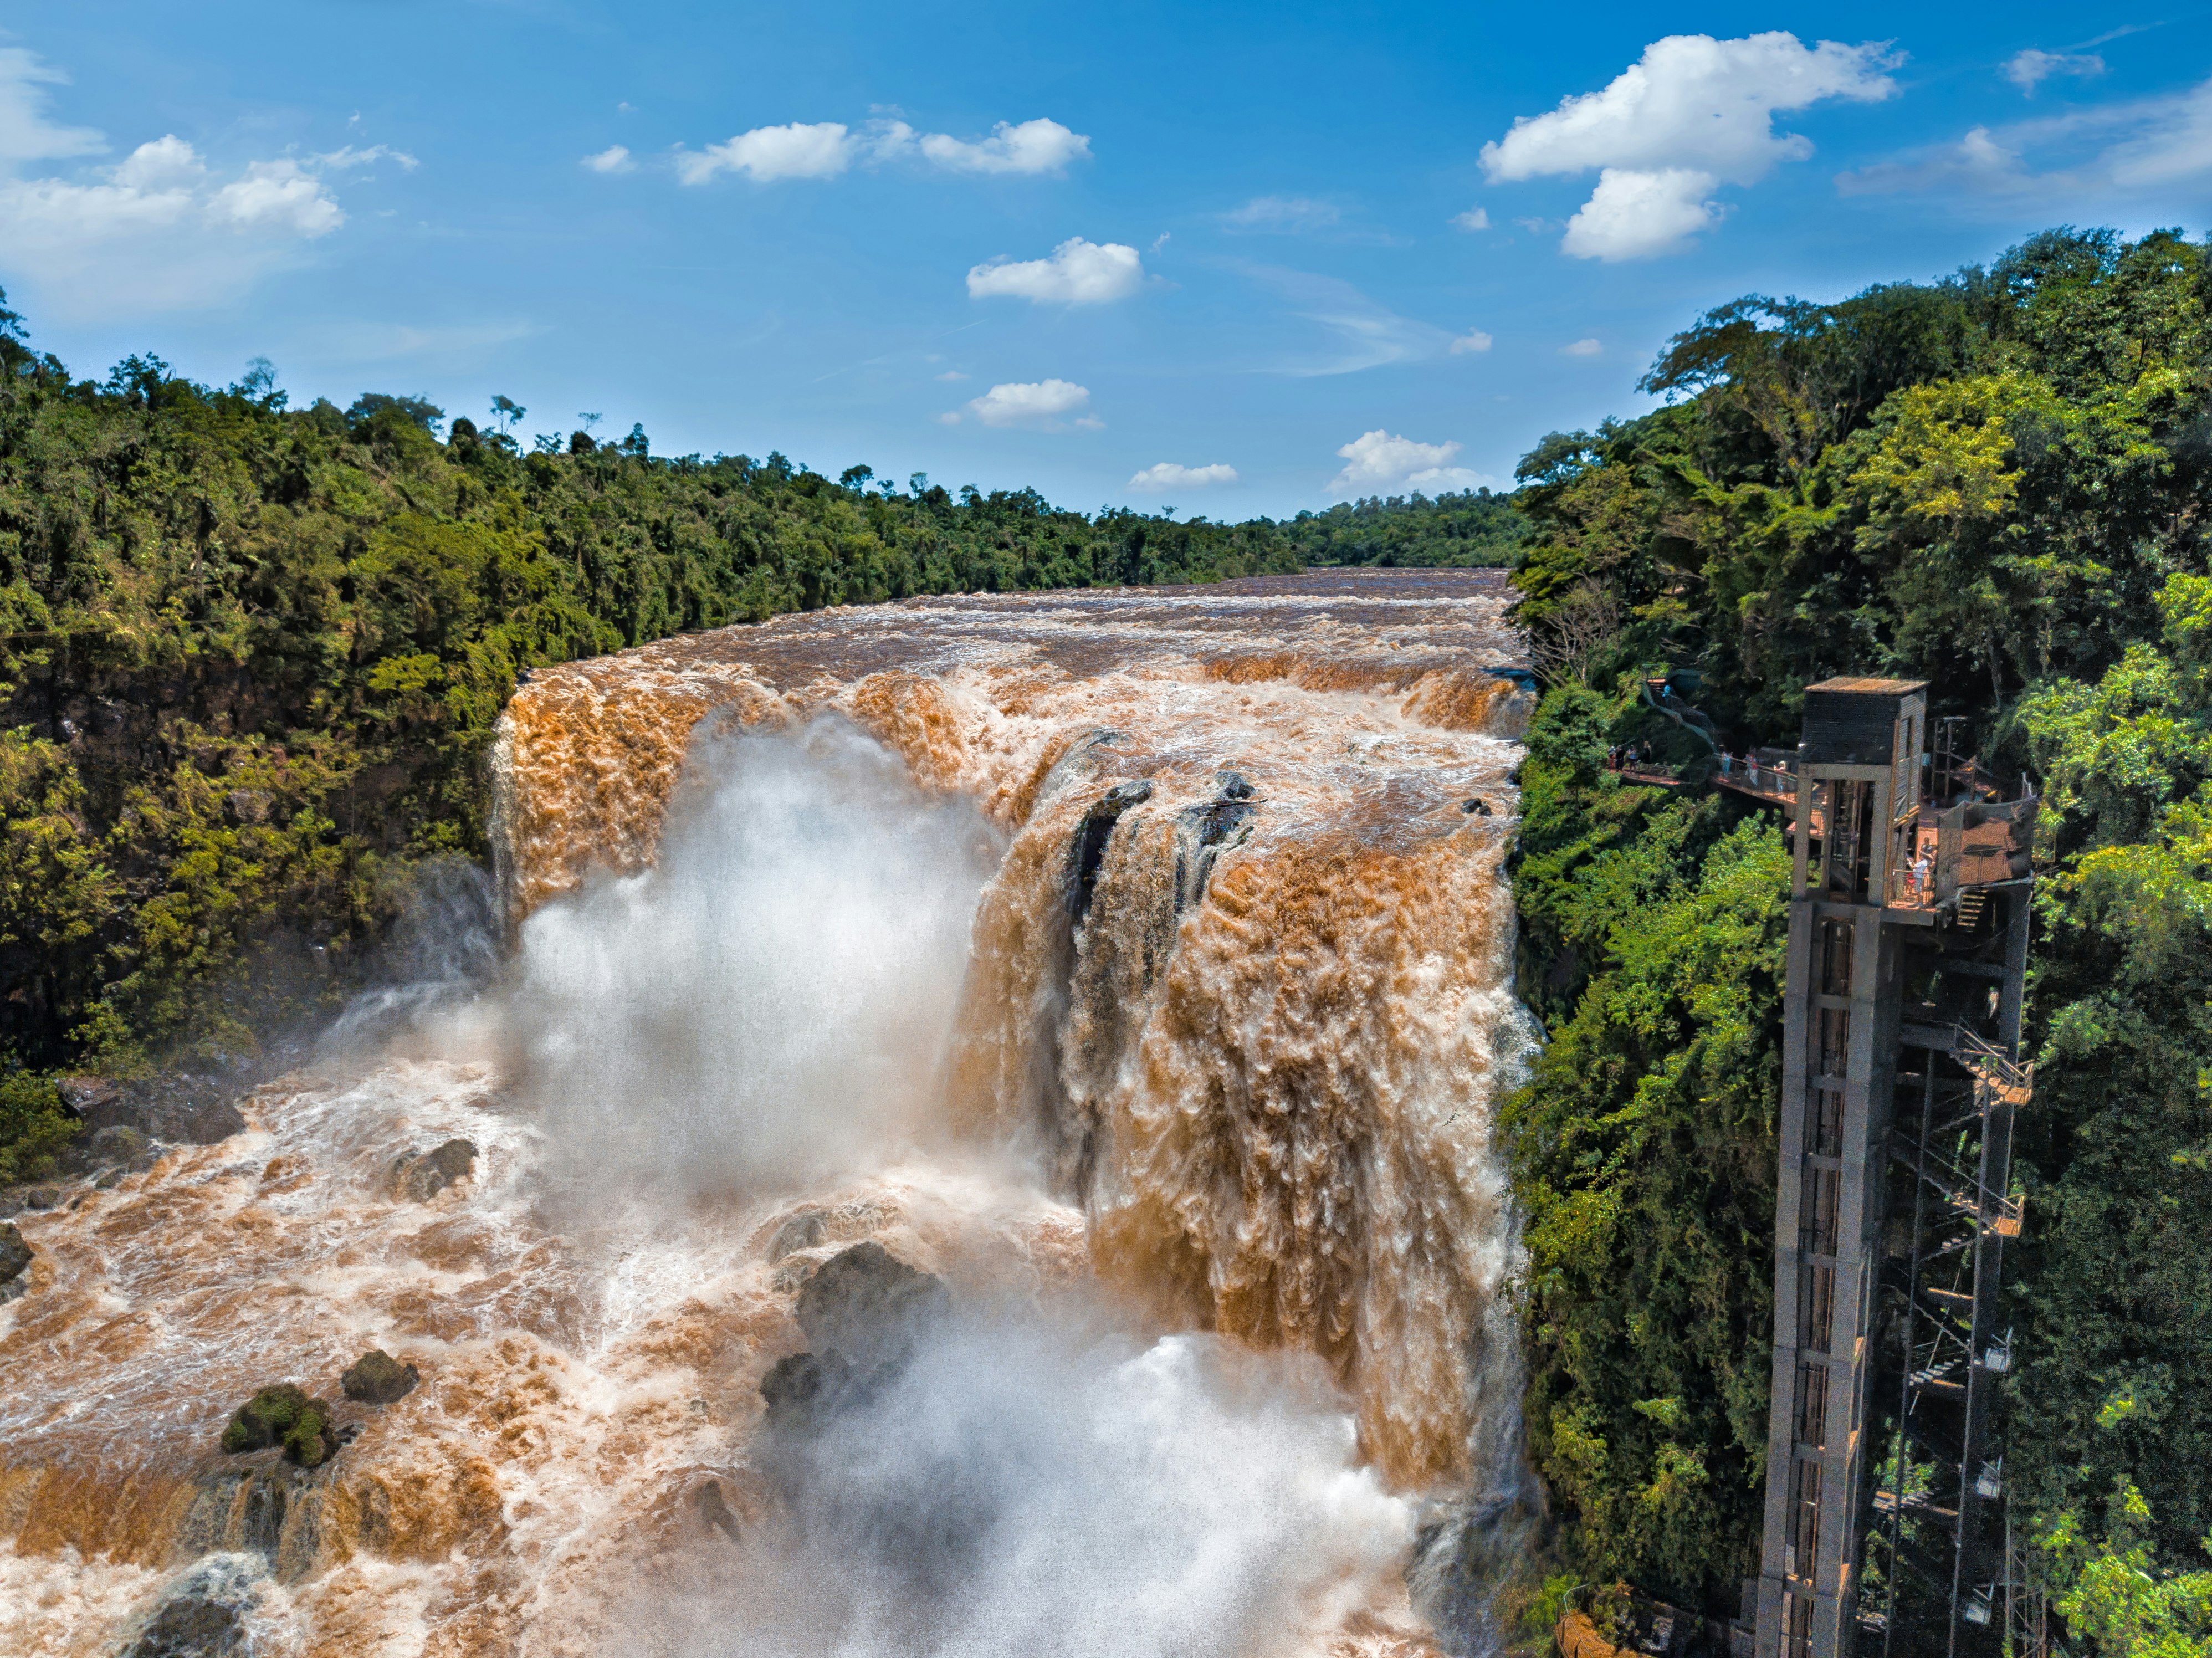 Brown colored water rushes over a tall falls in near the city of Ciudad del Este in Paraguay